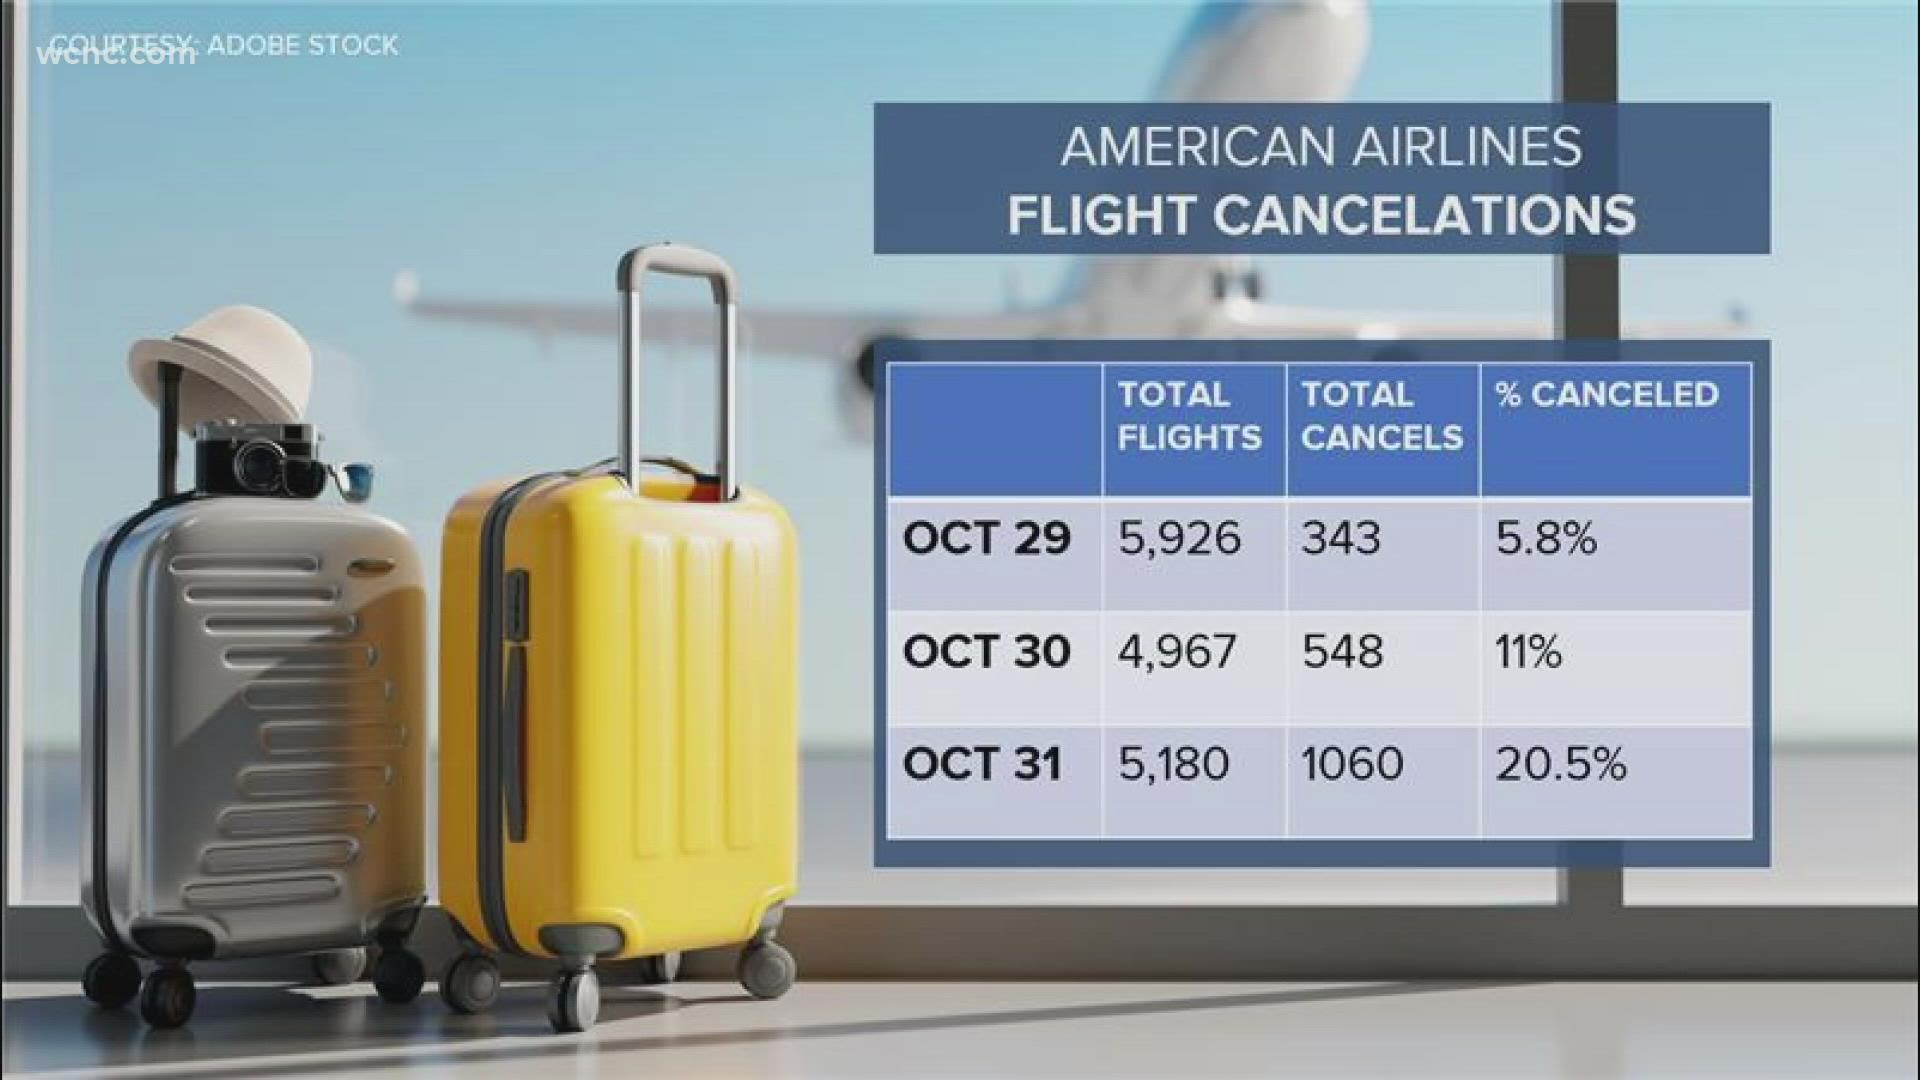 Since Friday, the airline canceled more than 2300 hundred flights included hundreds here in charlotte.